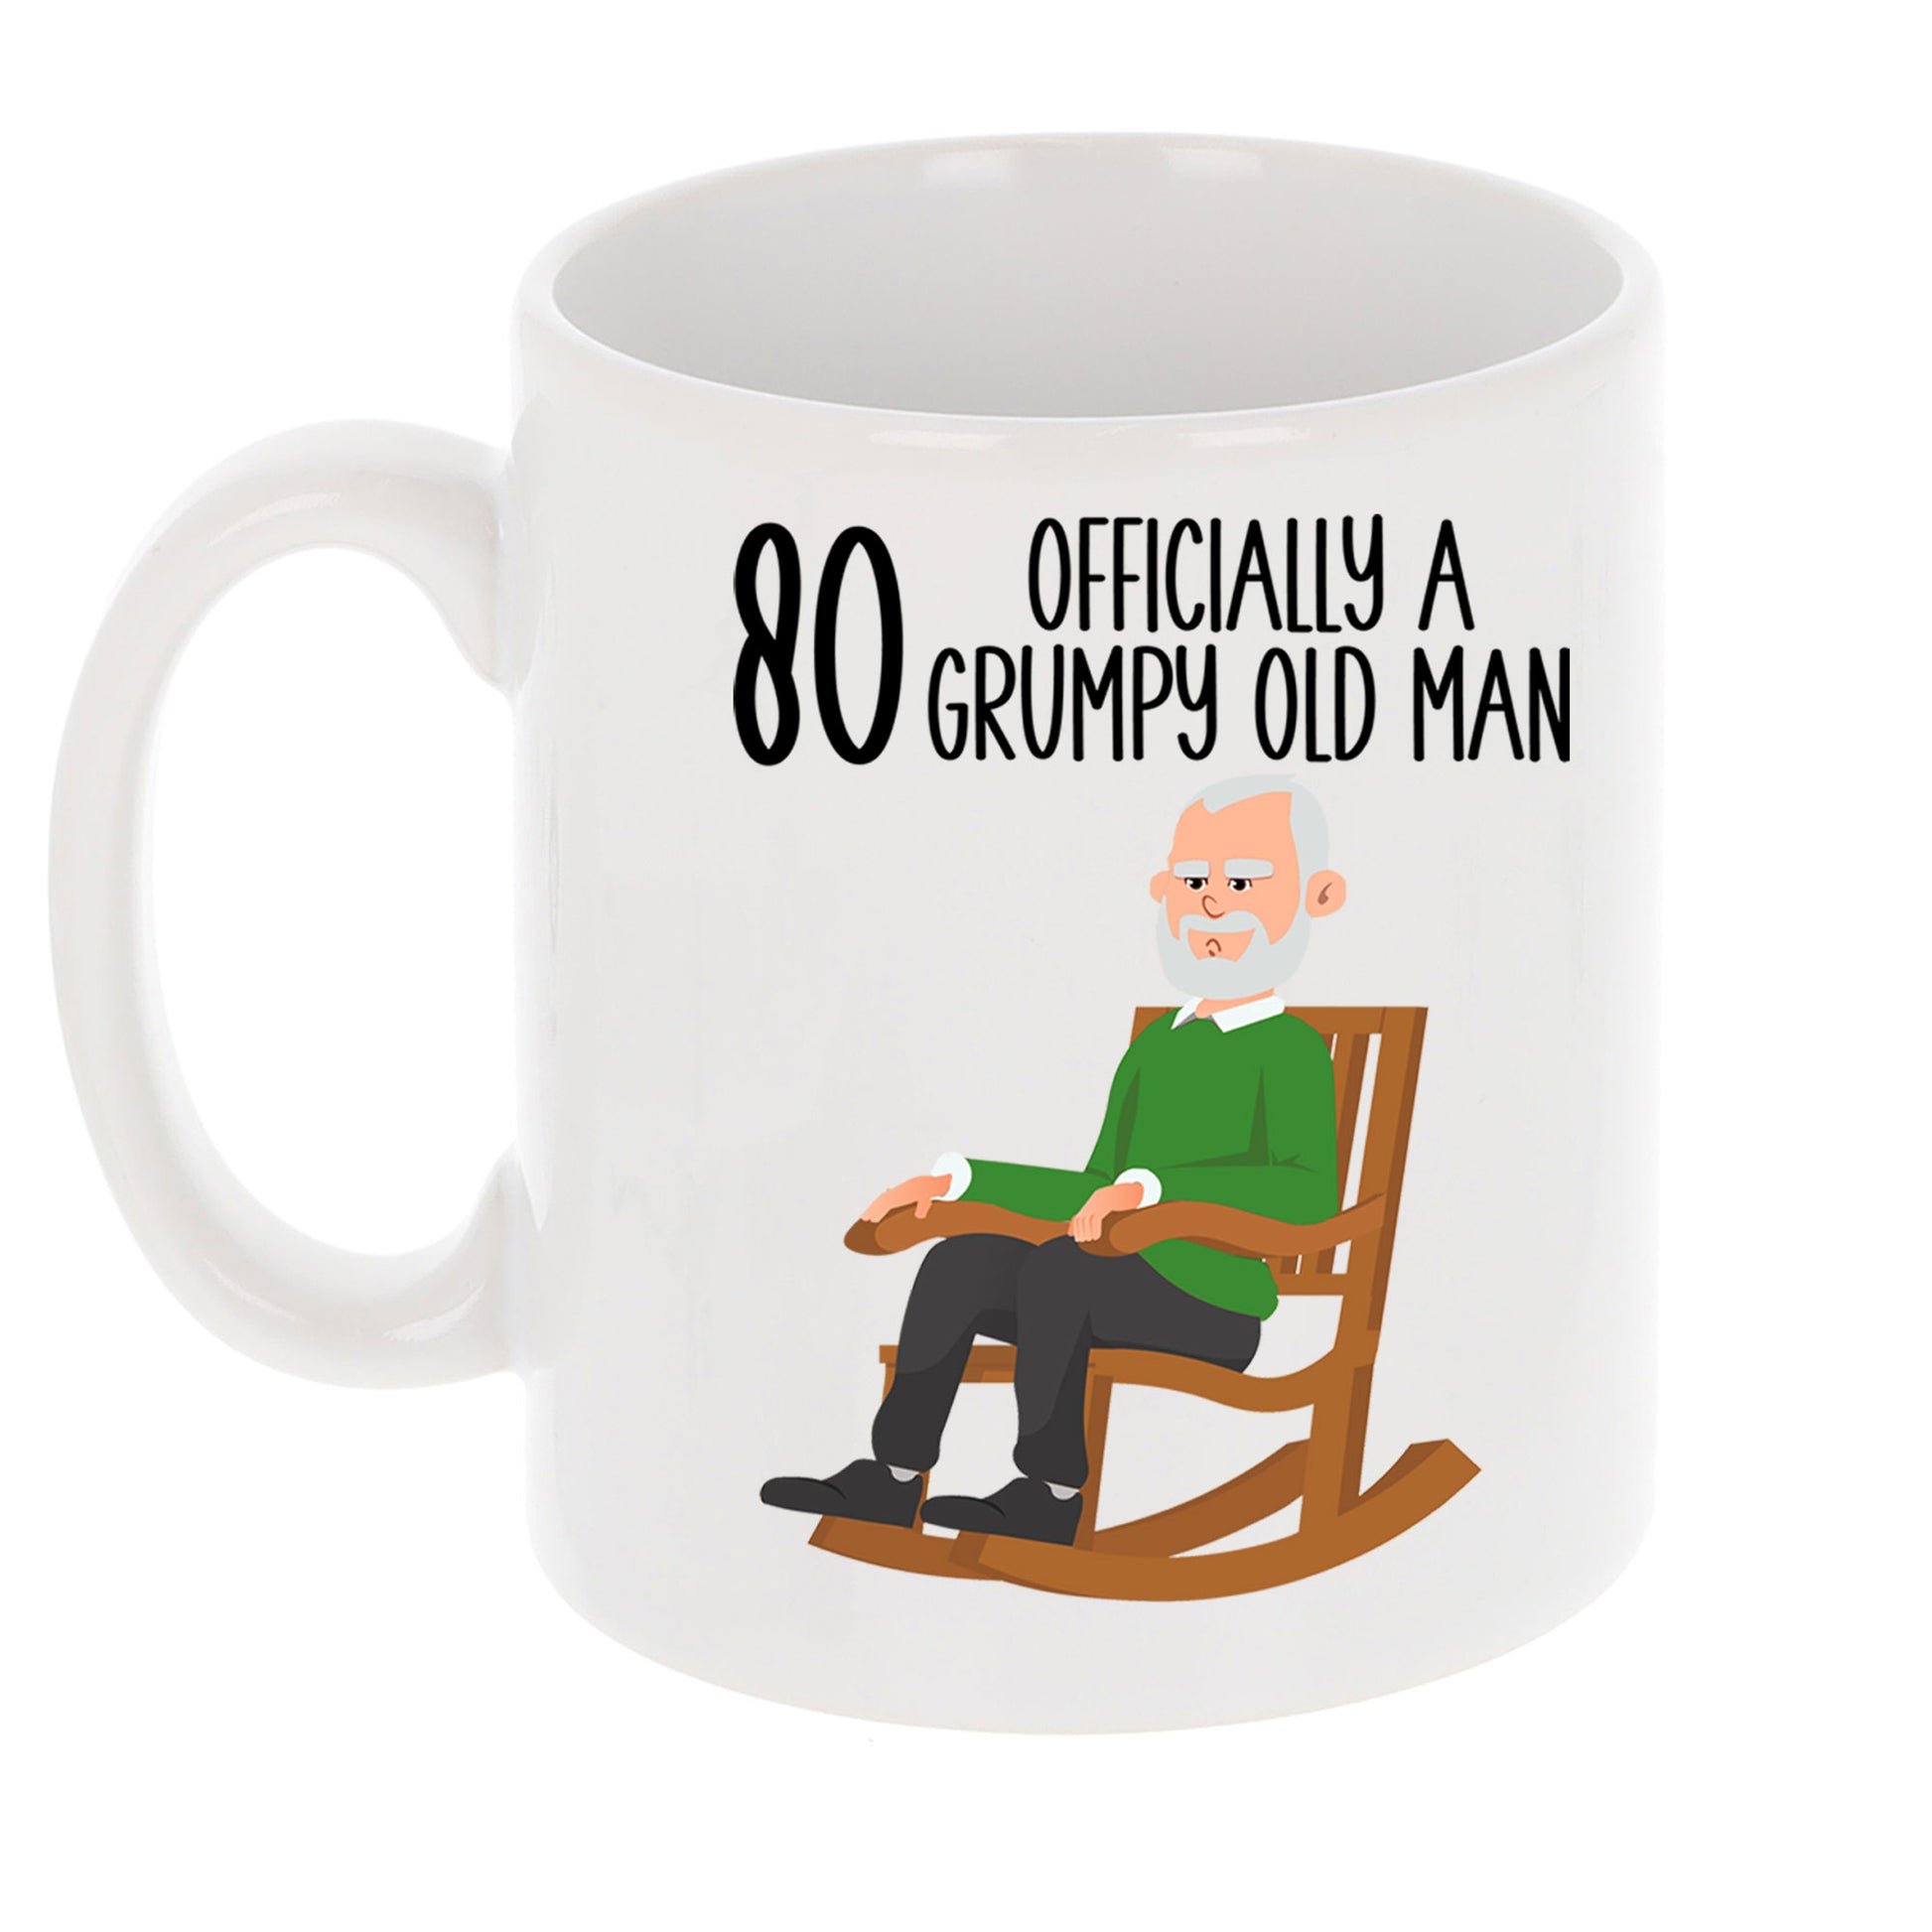 80 Officially A Grumpy Old Man Mug and/or Coaster Gift  - Always Looking Good - Mug On Its Own  